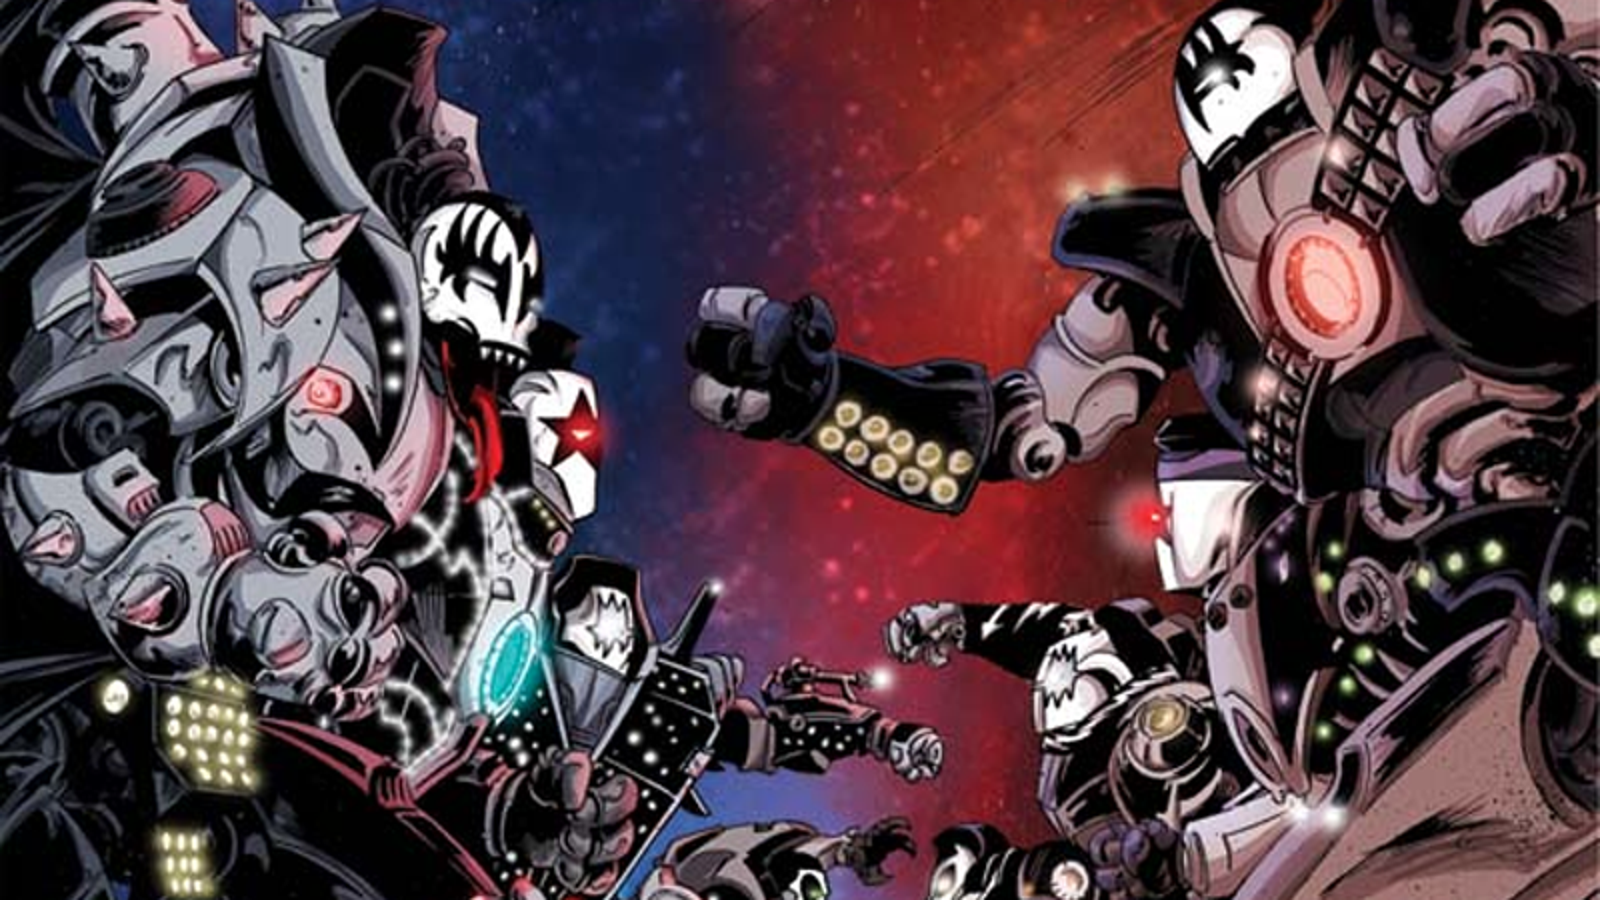 Kiss Returns To Comics For A Scifi Epic And Yes Those Are Totally Giant Kiss Robots